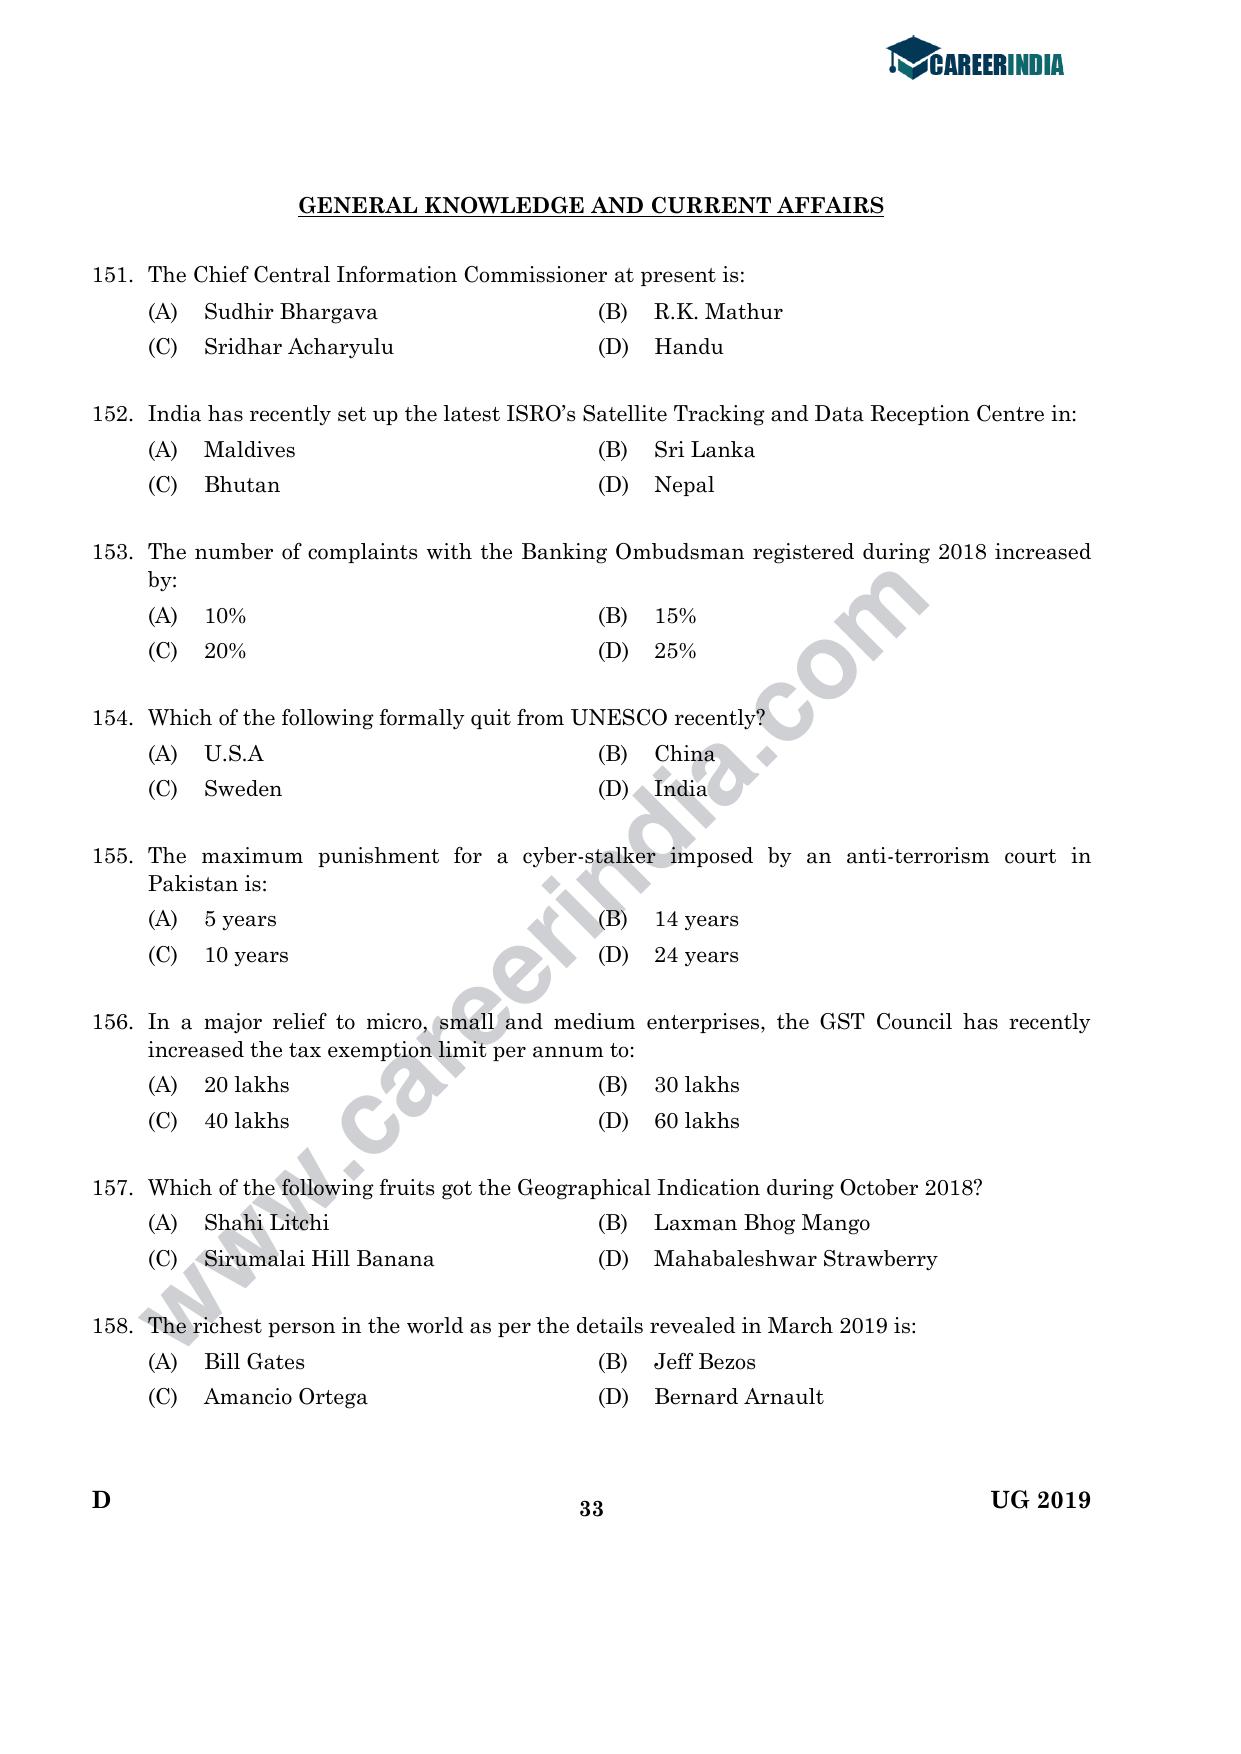 CLAT 2019 UG Logical-Reasoning Question Paper - Page 32